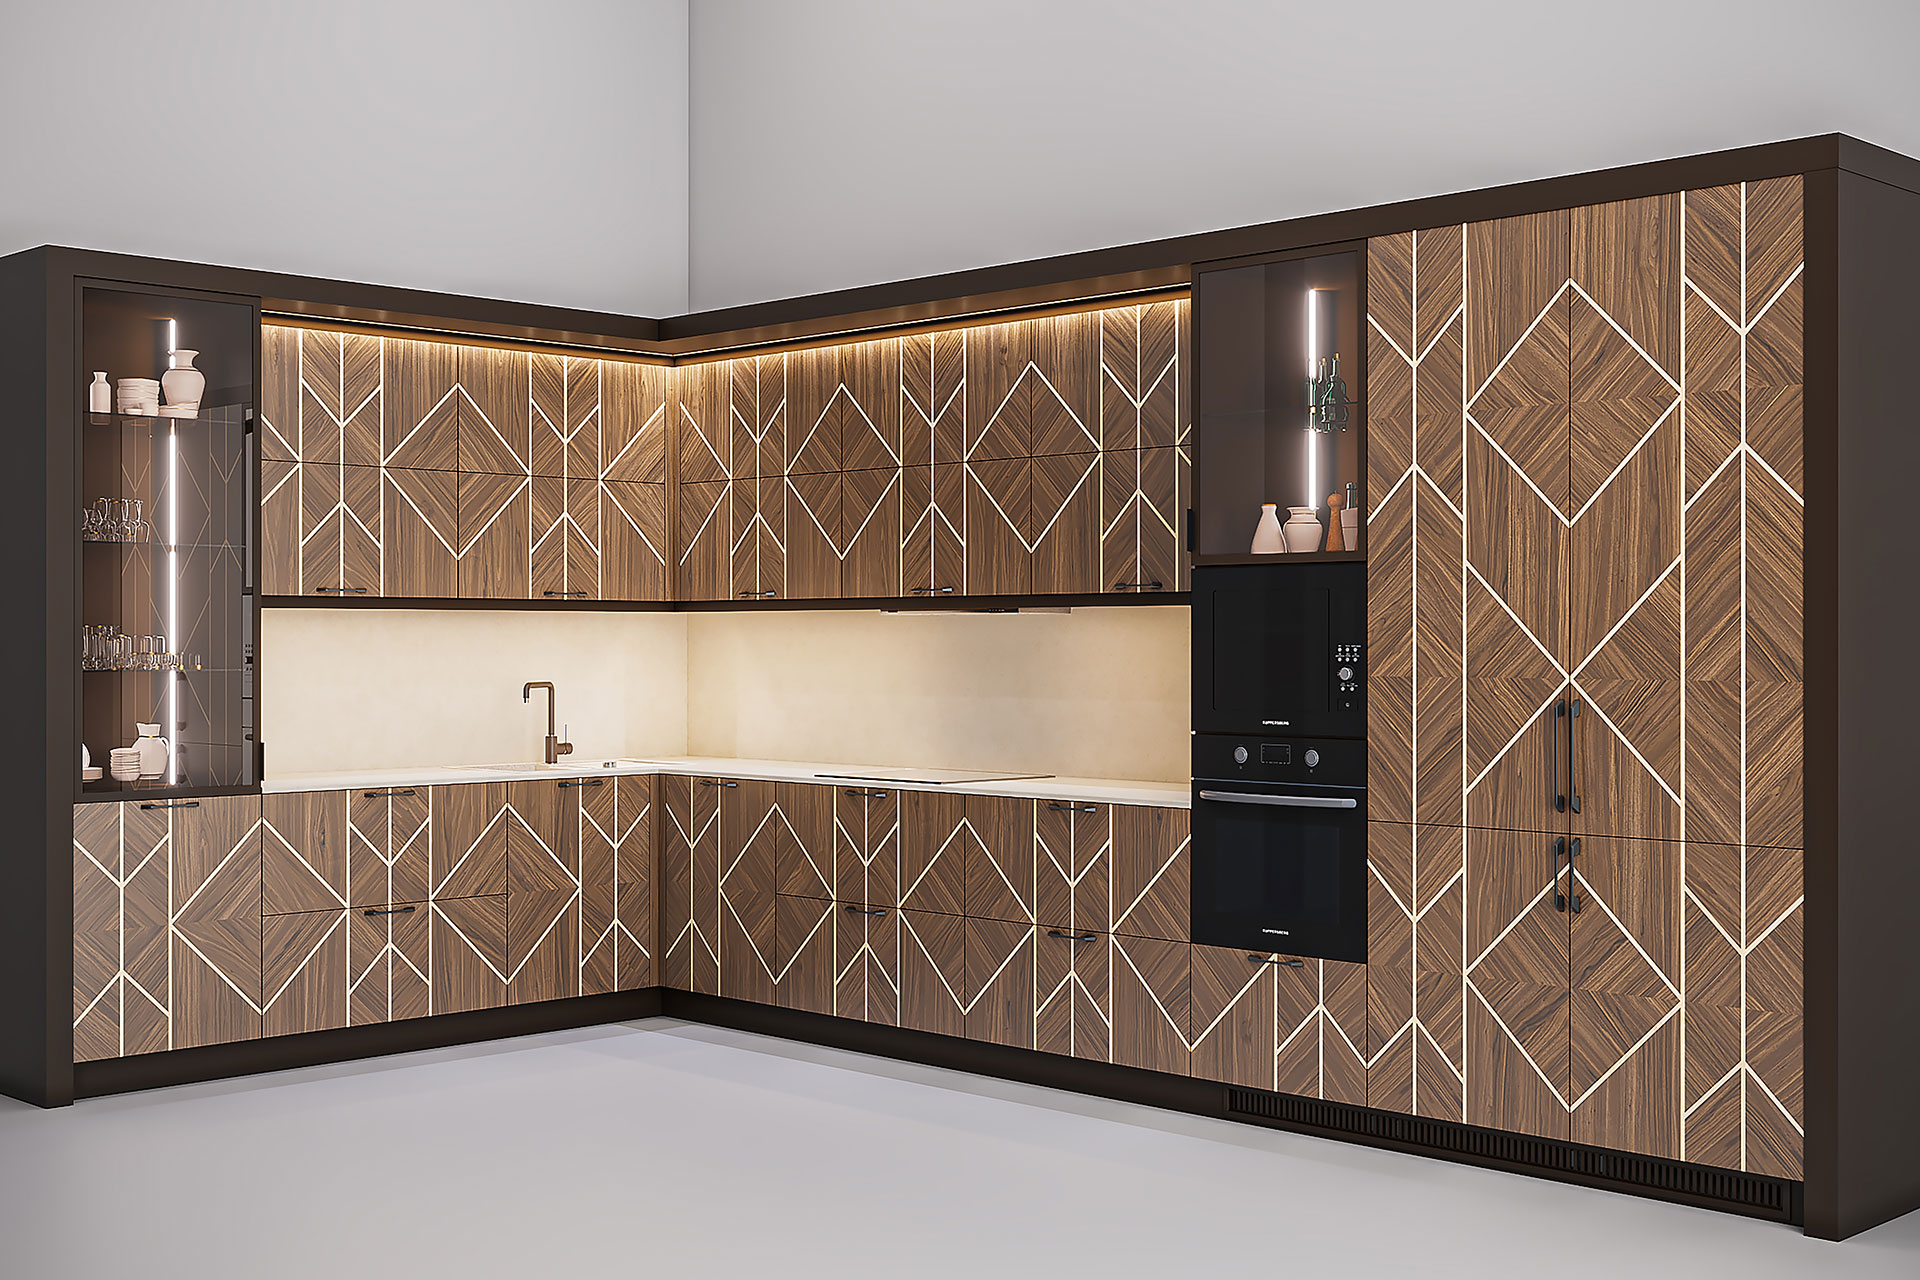 Kitchen with veneered fronts and intarsia